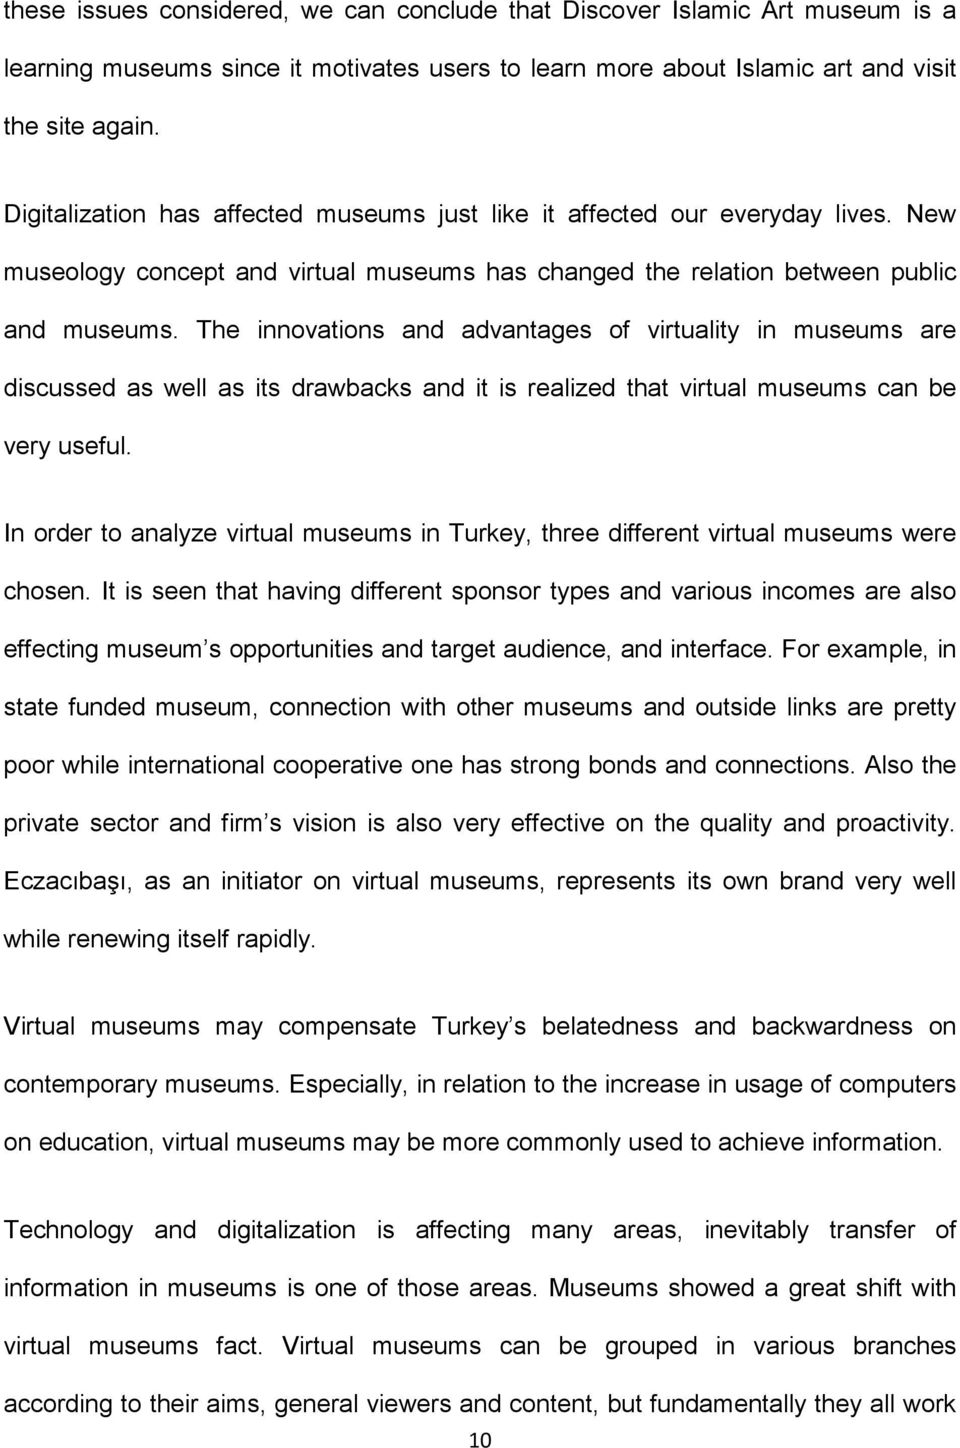 The innovations and advantages of virtuality in museums are discussed as well as its drawbacks and it is realized that virtual museums can be very useful.